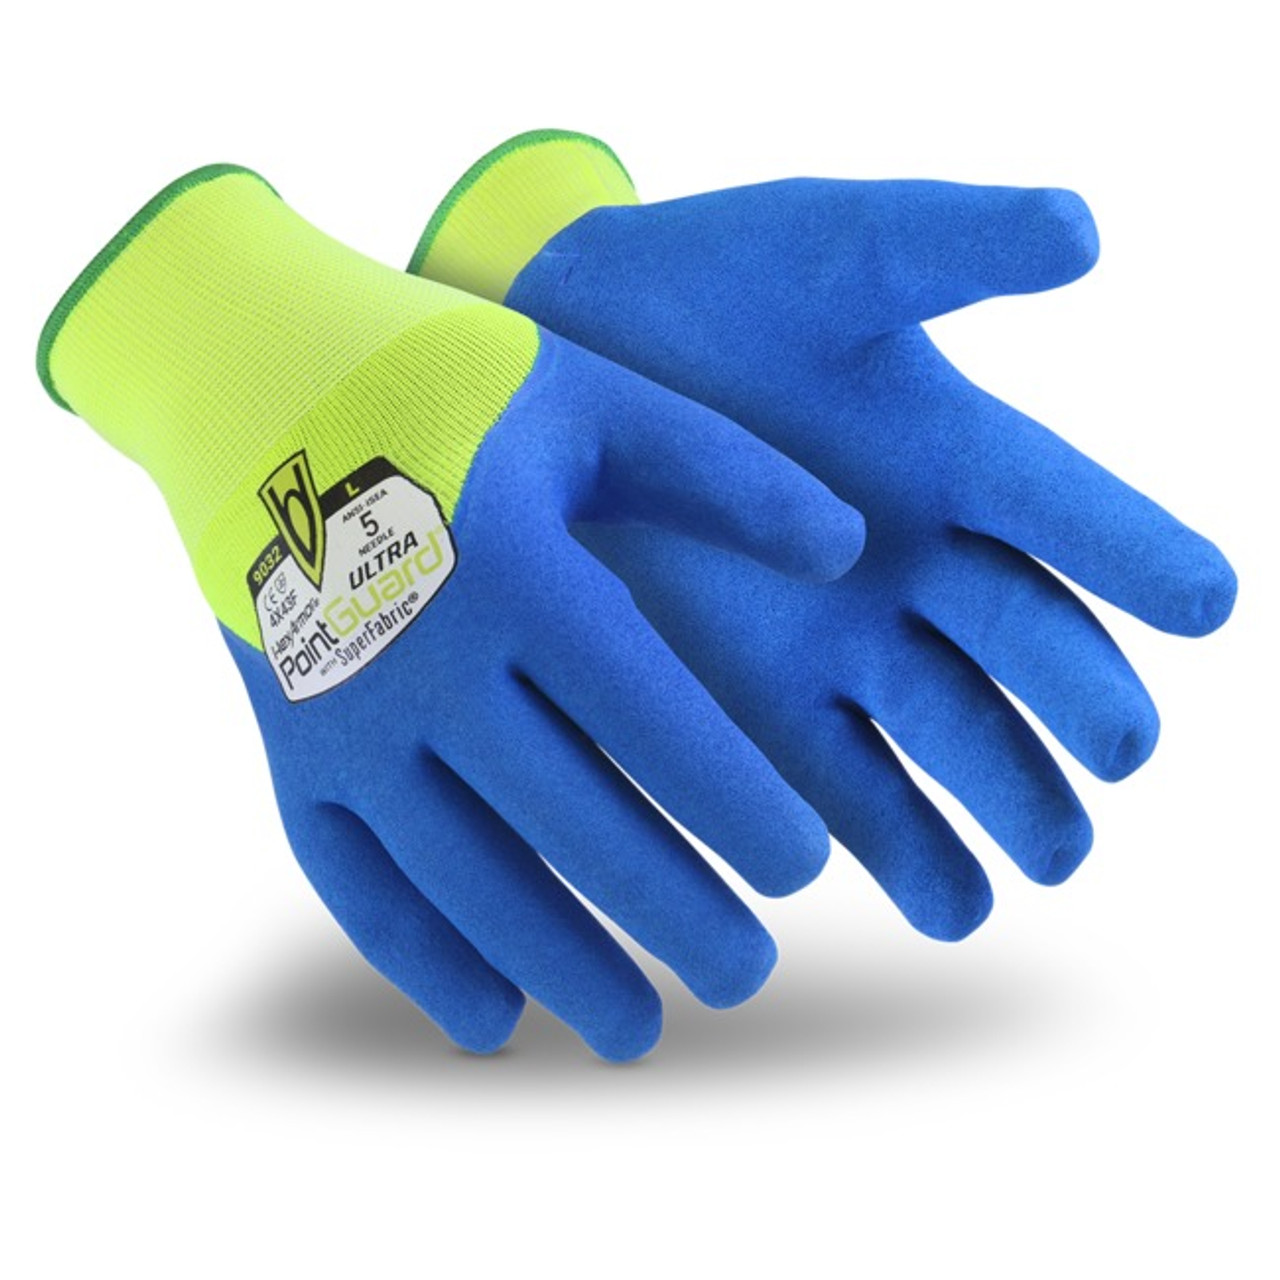 Proven Needle Stick Protection  Needle Resistant Gloves 